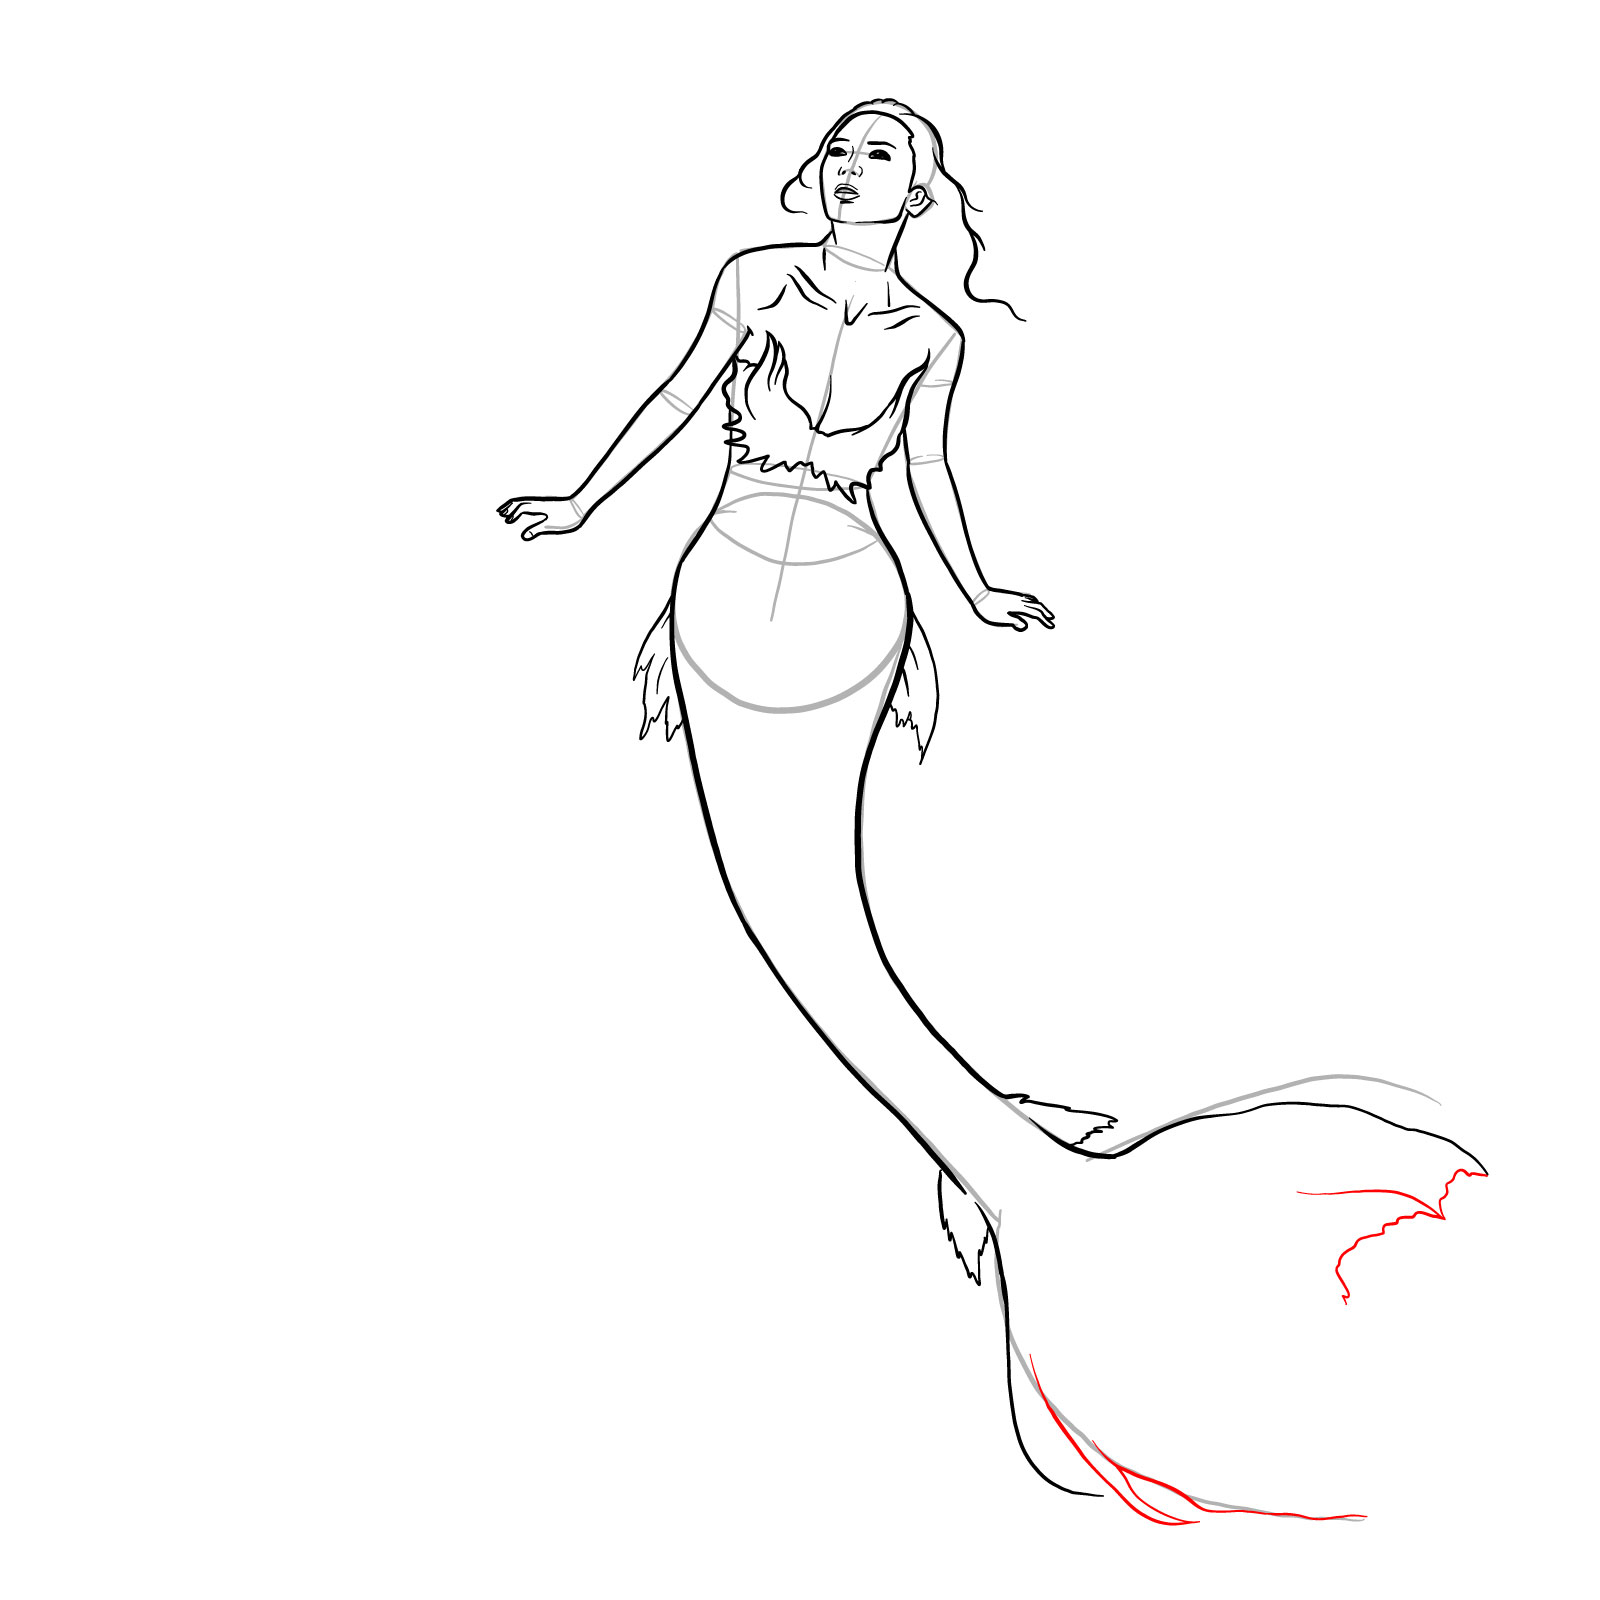 How to draw a Mermaid - step 23